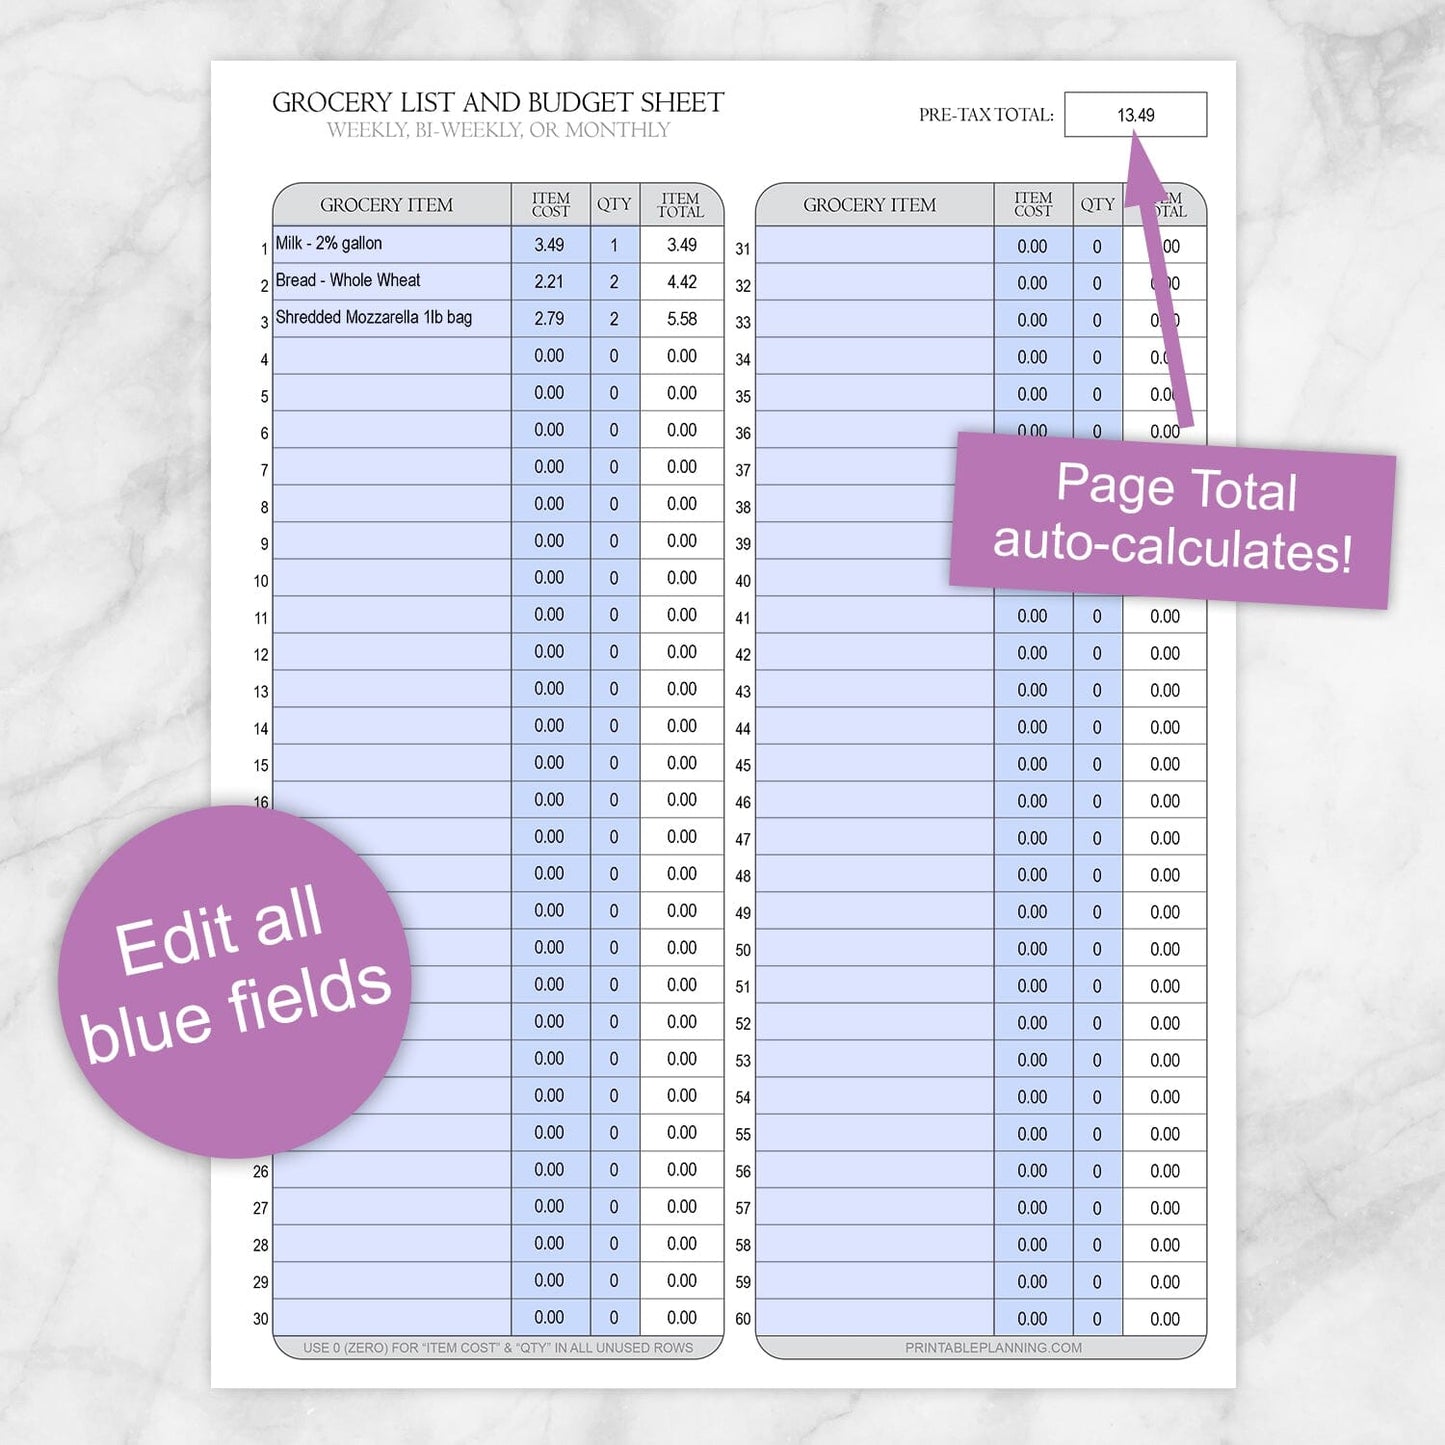 Printable Grocery Budget List and Worksheet at Printable Planning. Edit all blue fields.